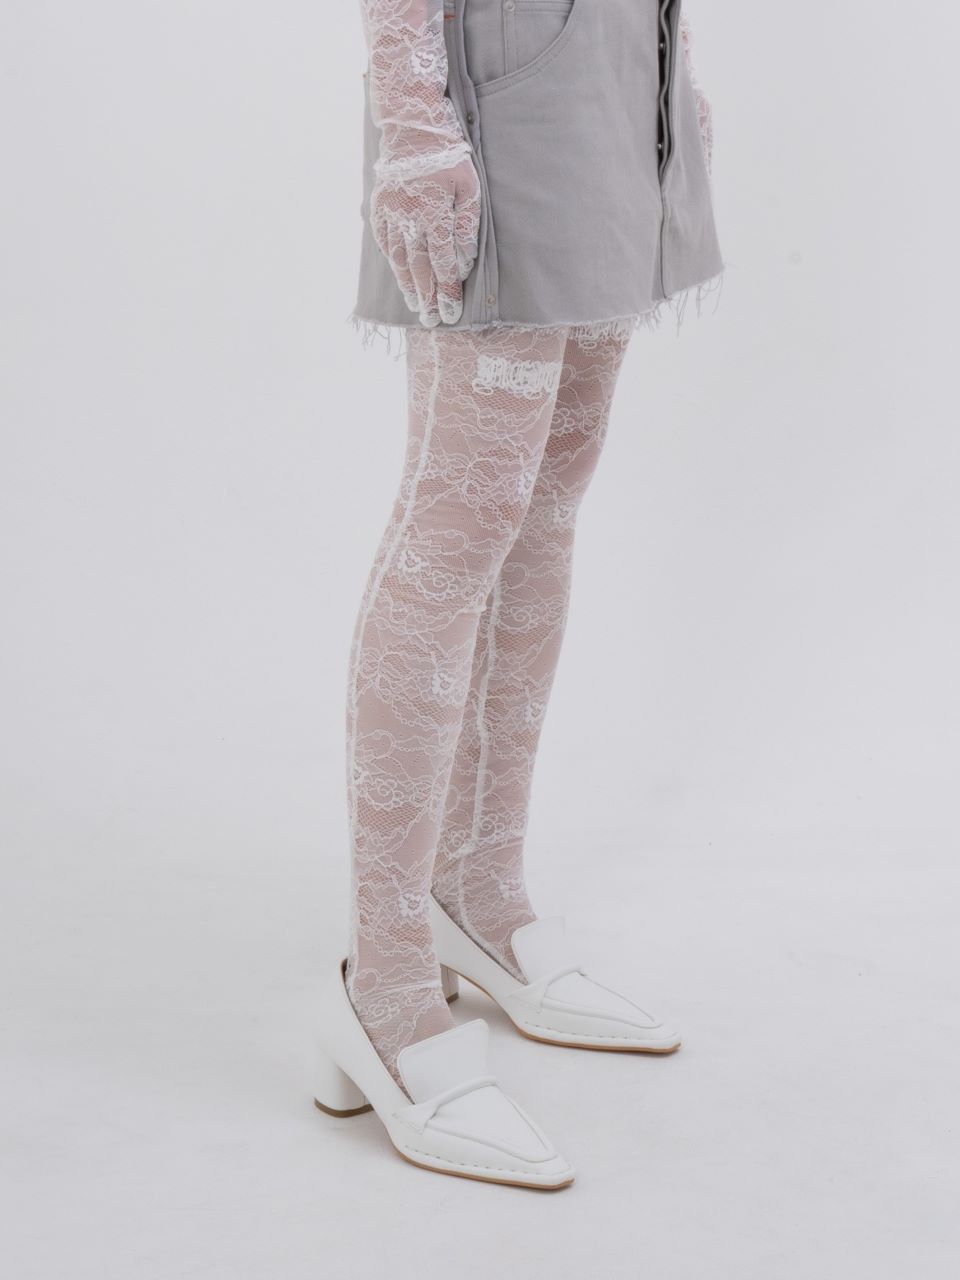 Lace Calligraphy Tights(White)